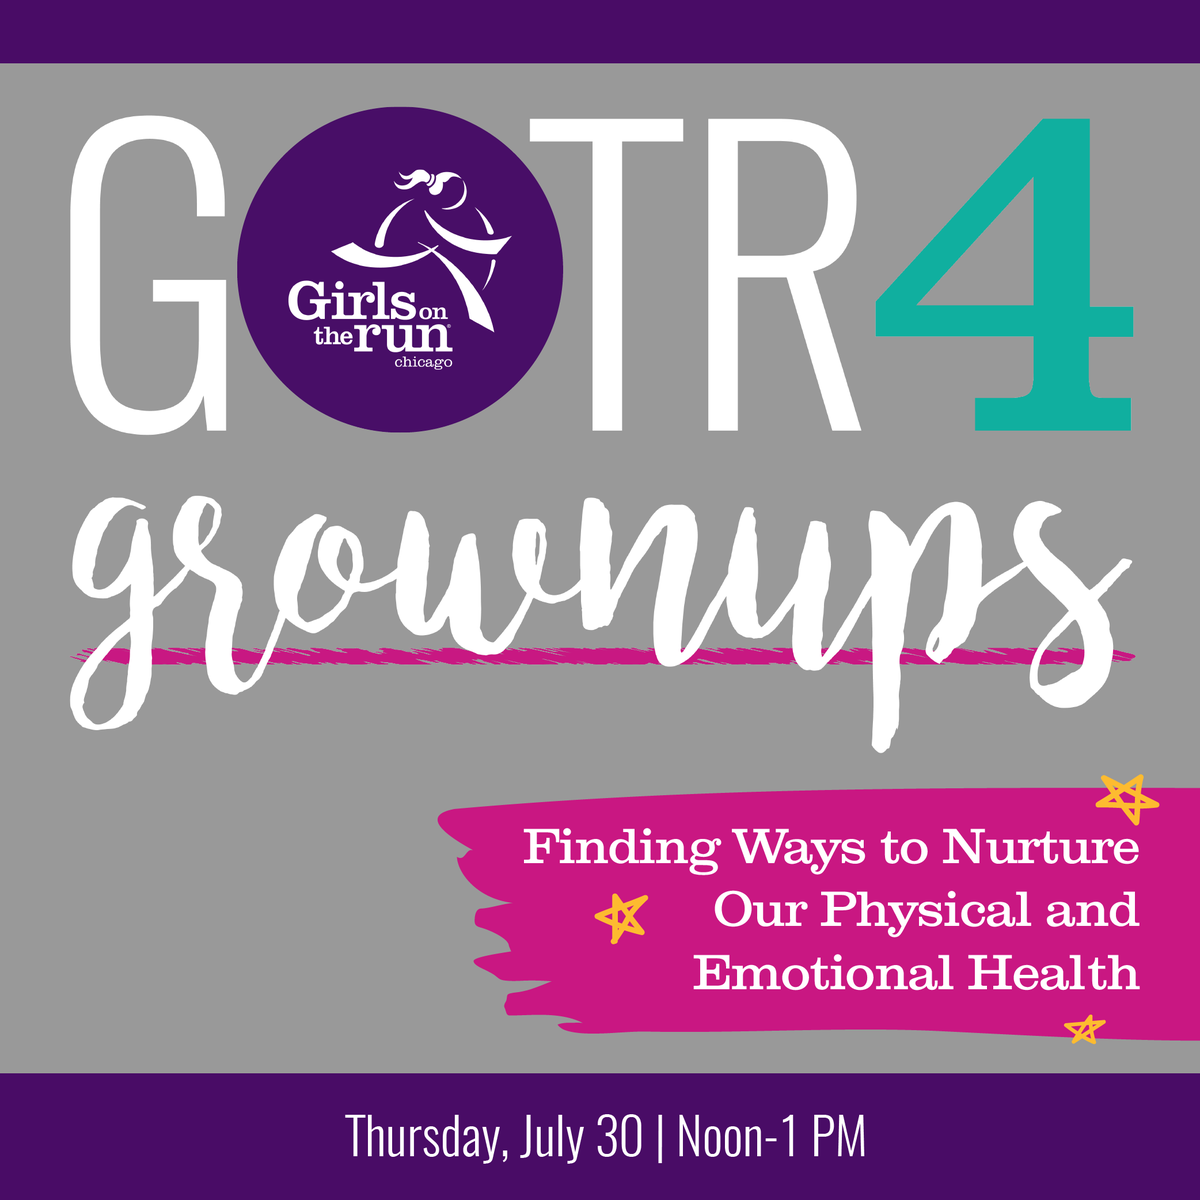 Calling all GOTR Grownups! Nurturing our emotional health is important—even grownups! That's why we've designed an event that adapts three Girls on the Run lessons for adults. You'll leave the event with new coping skills that will help you both personally and professionally!